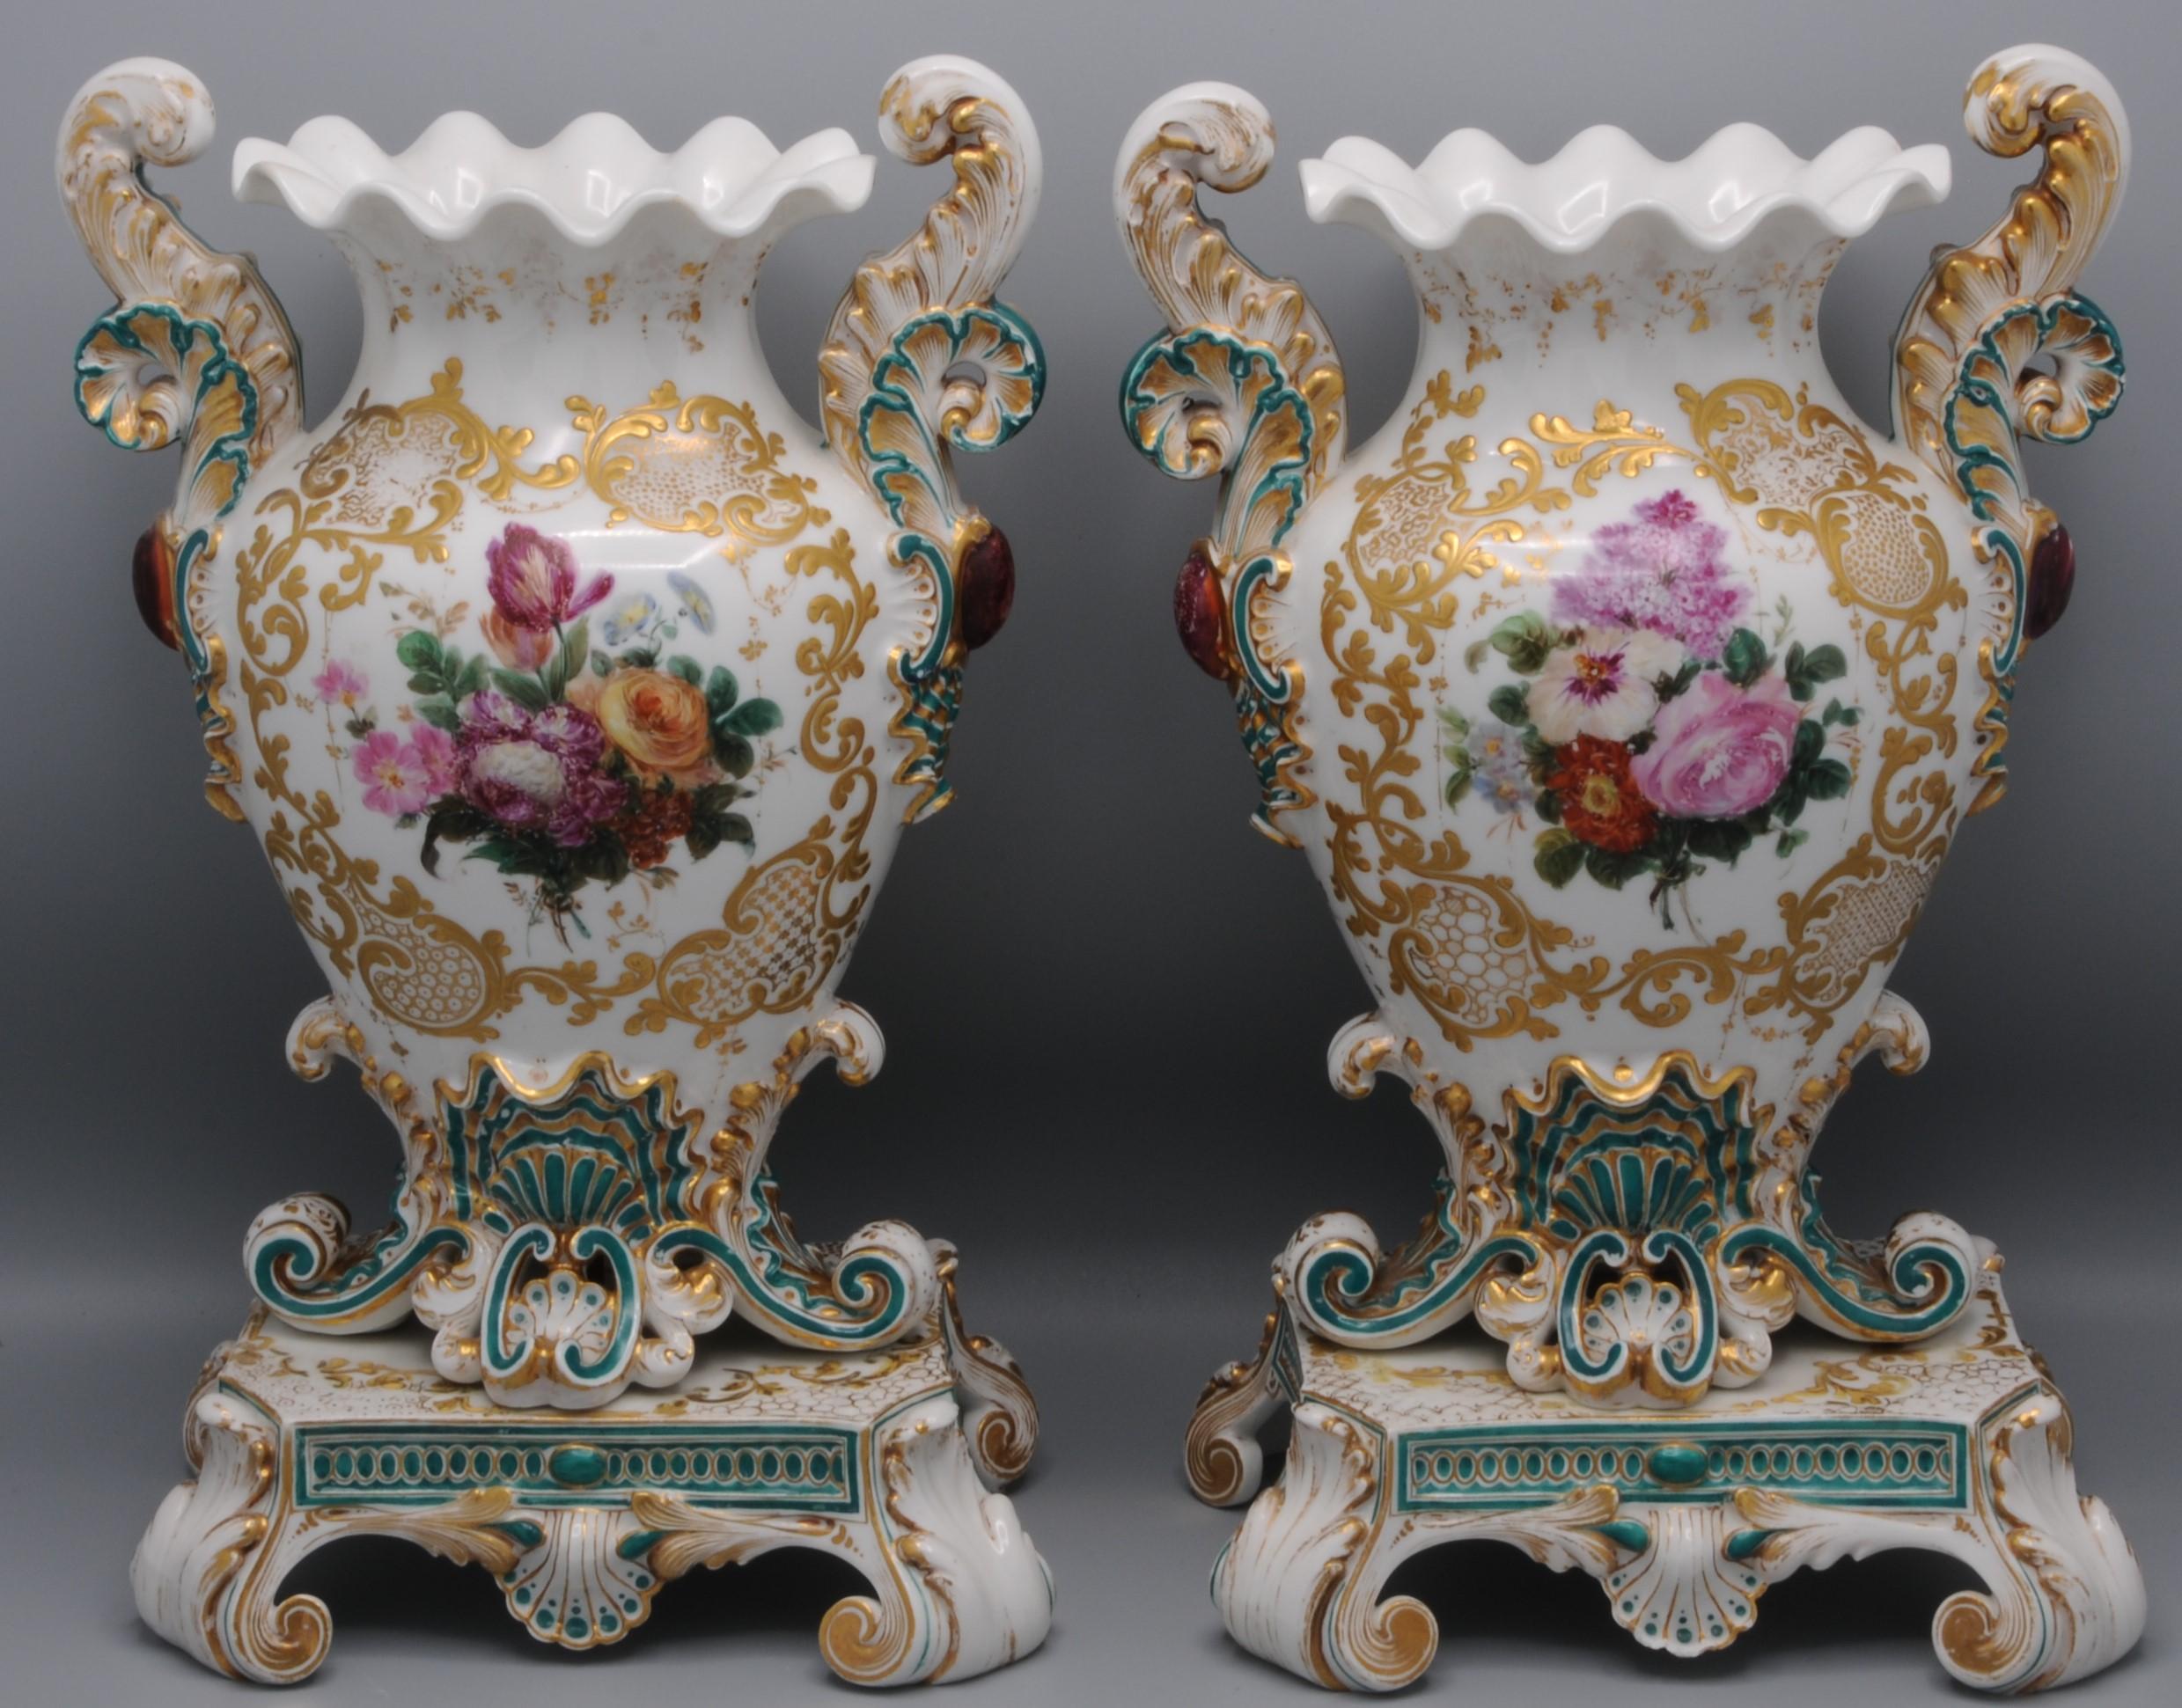 Jacob Petit (1796-1868) - Pair of Rococo Revival Vases For Sale 8